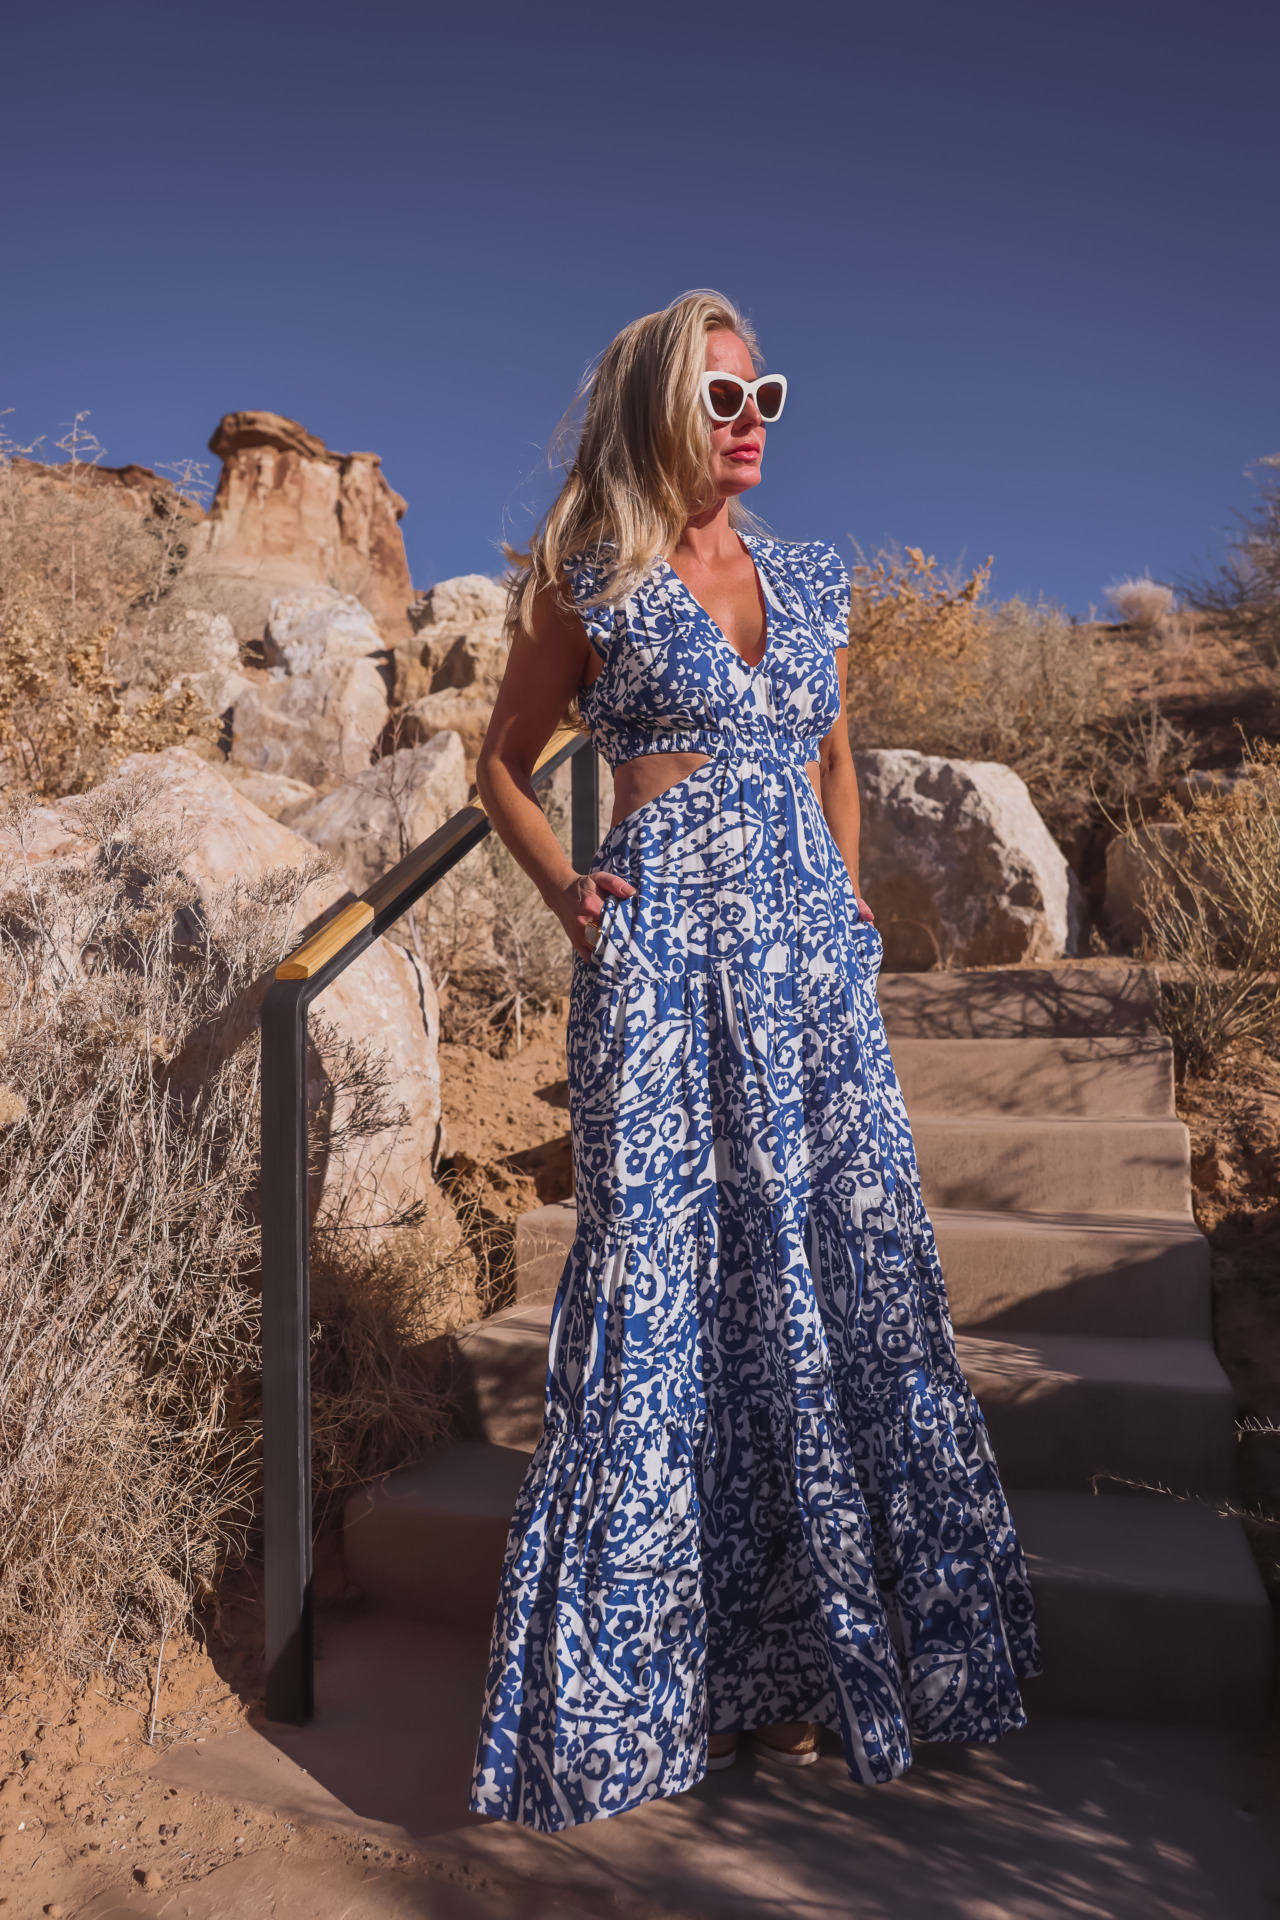 What To Wear To Easter Brunch, what to wear to easter, easter outfits, easter brunch outfits, easter brunch outfit ideas, blue and white paisley printed me+em cutout dress, see by chloe wedges, white butterfly dior sunglasses, julie vos cuffs